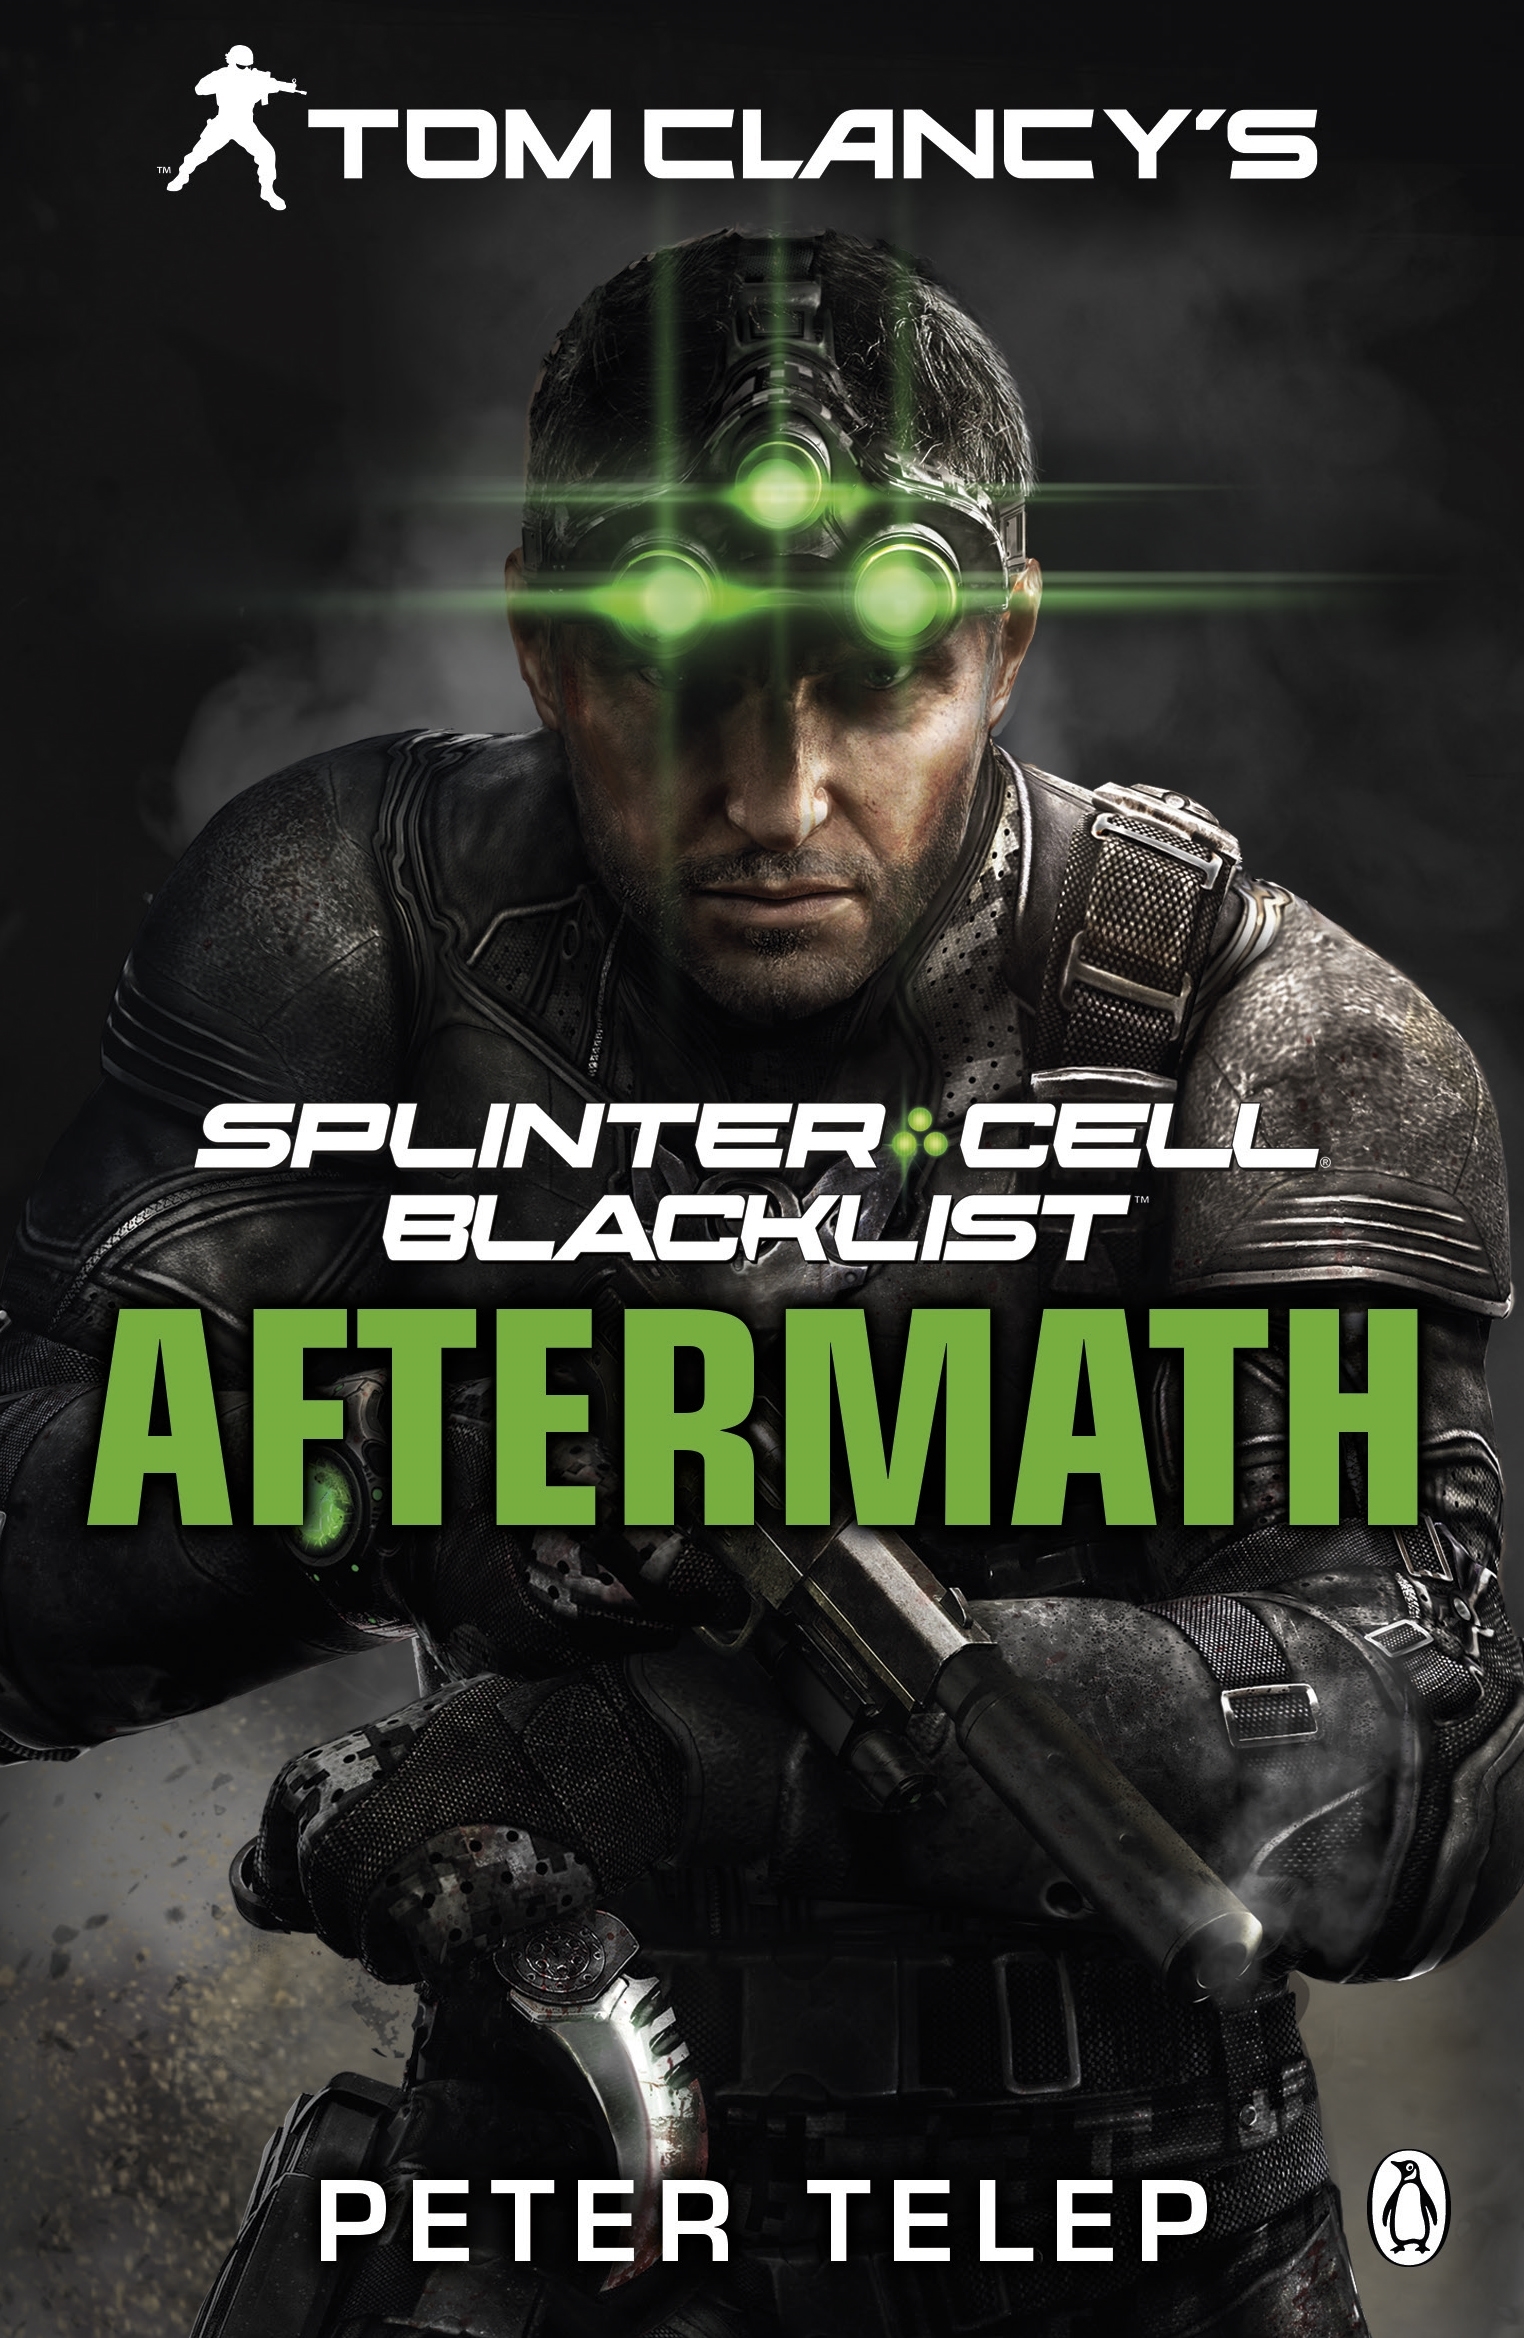 Tom Clancy's Splinter Cell: Blacklist Aftermath by Peter Telep